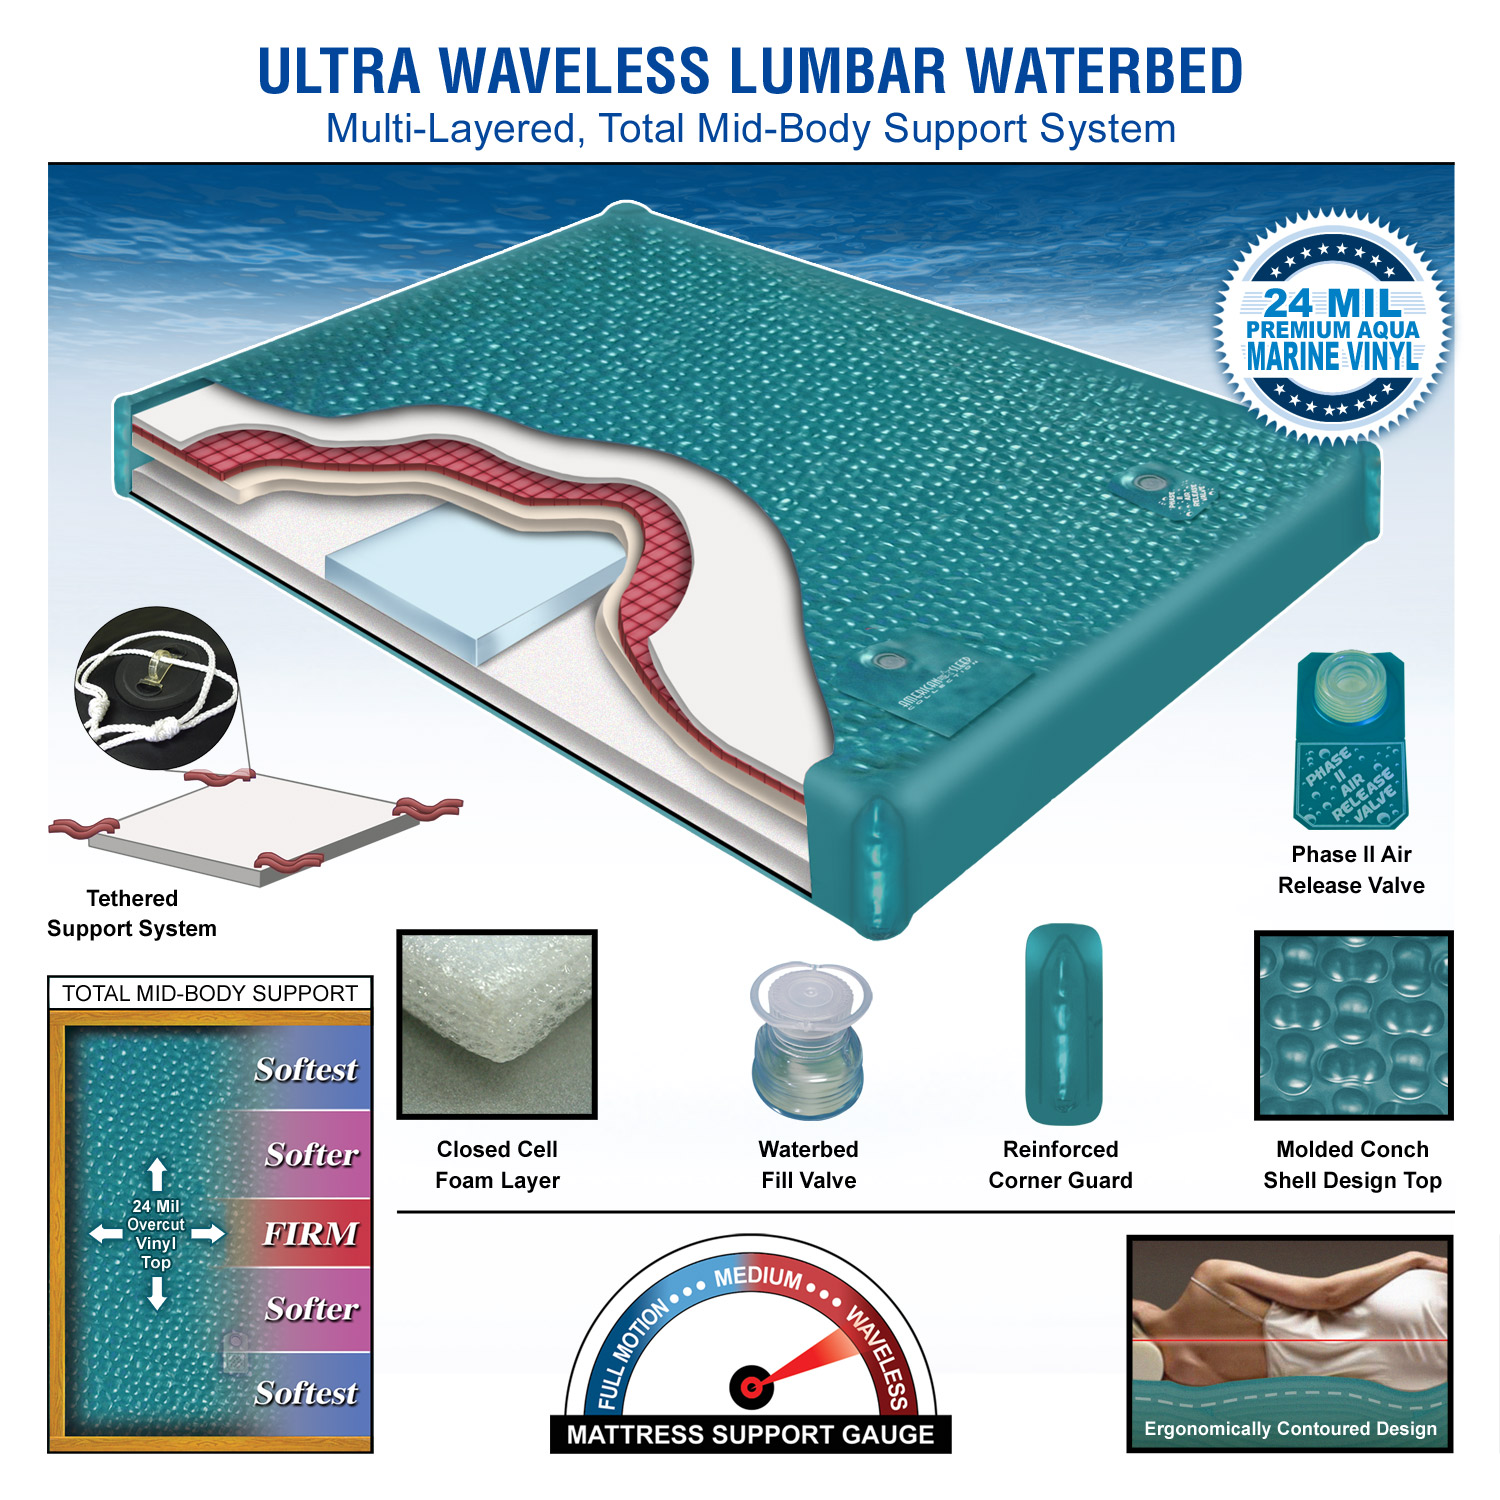 CAL KING 70% TETHERED WAVELESS MID BODY SUPPORT WATERBED MATTRESS BUNDLES 